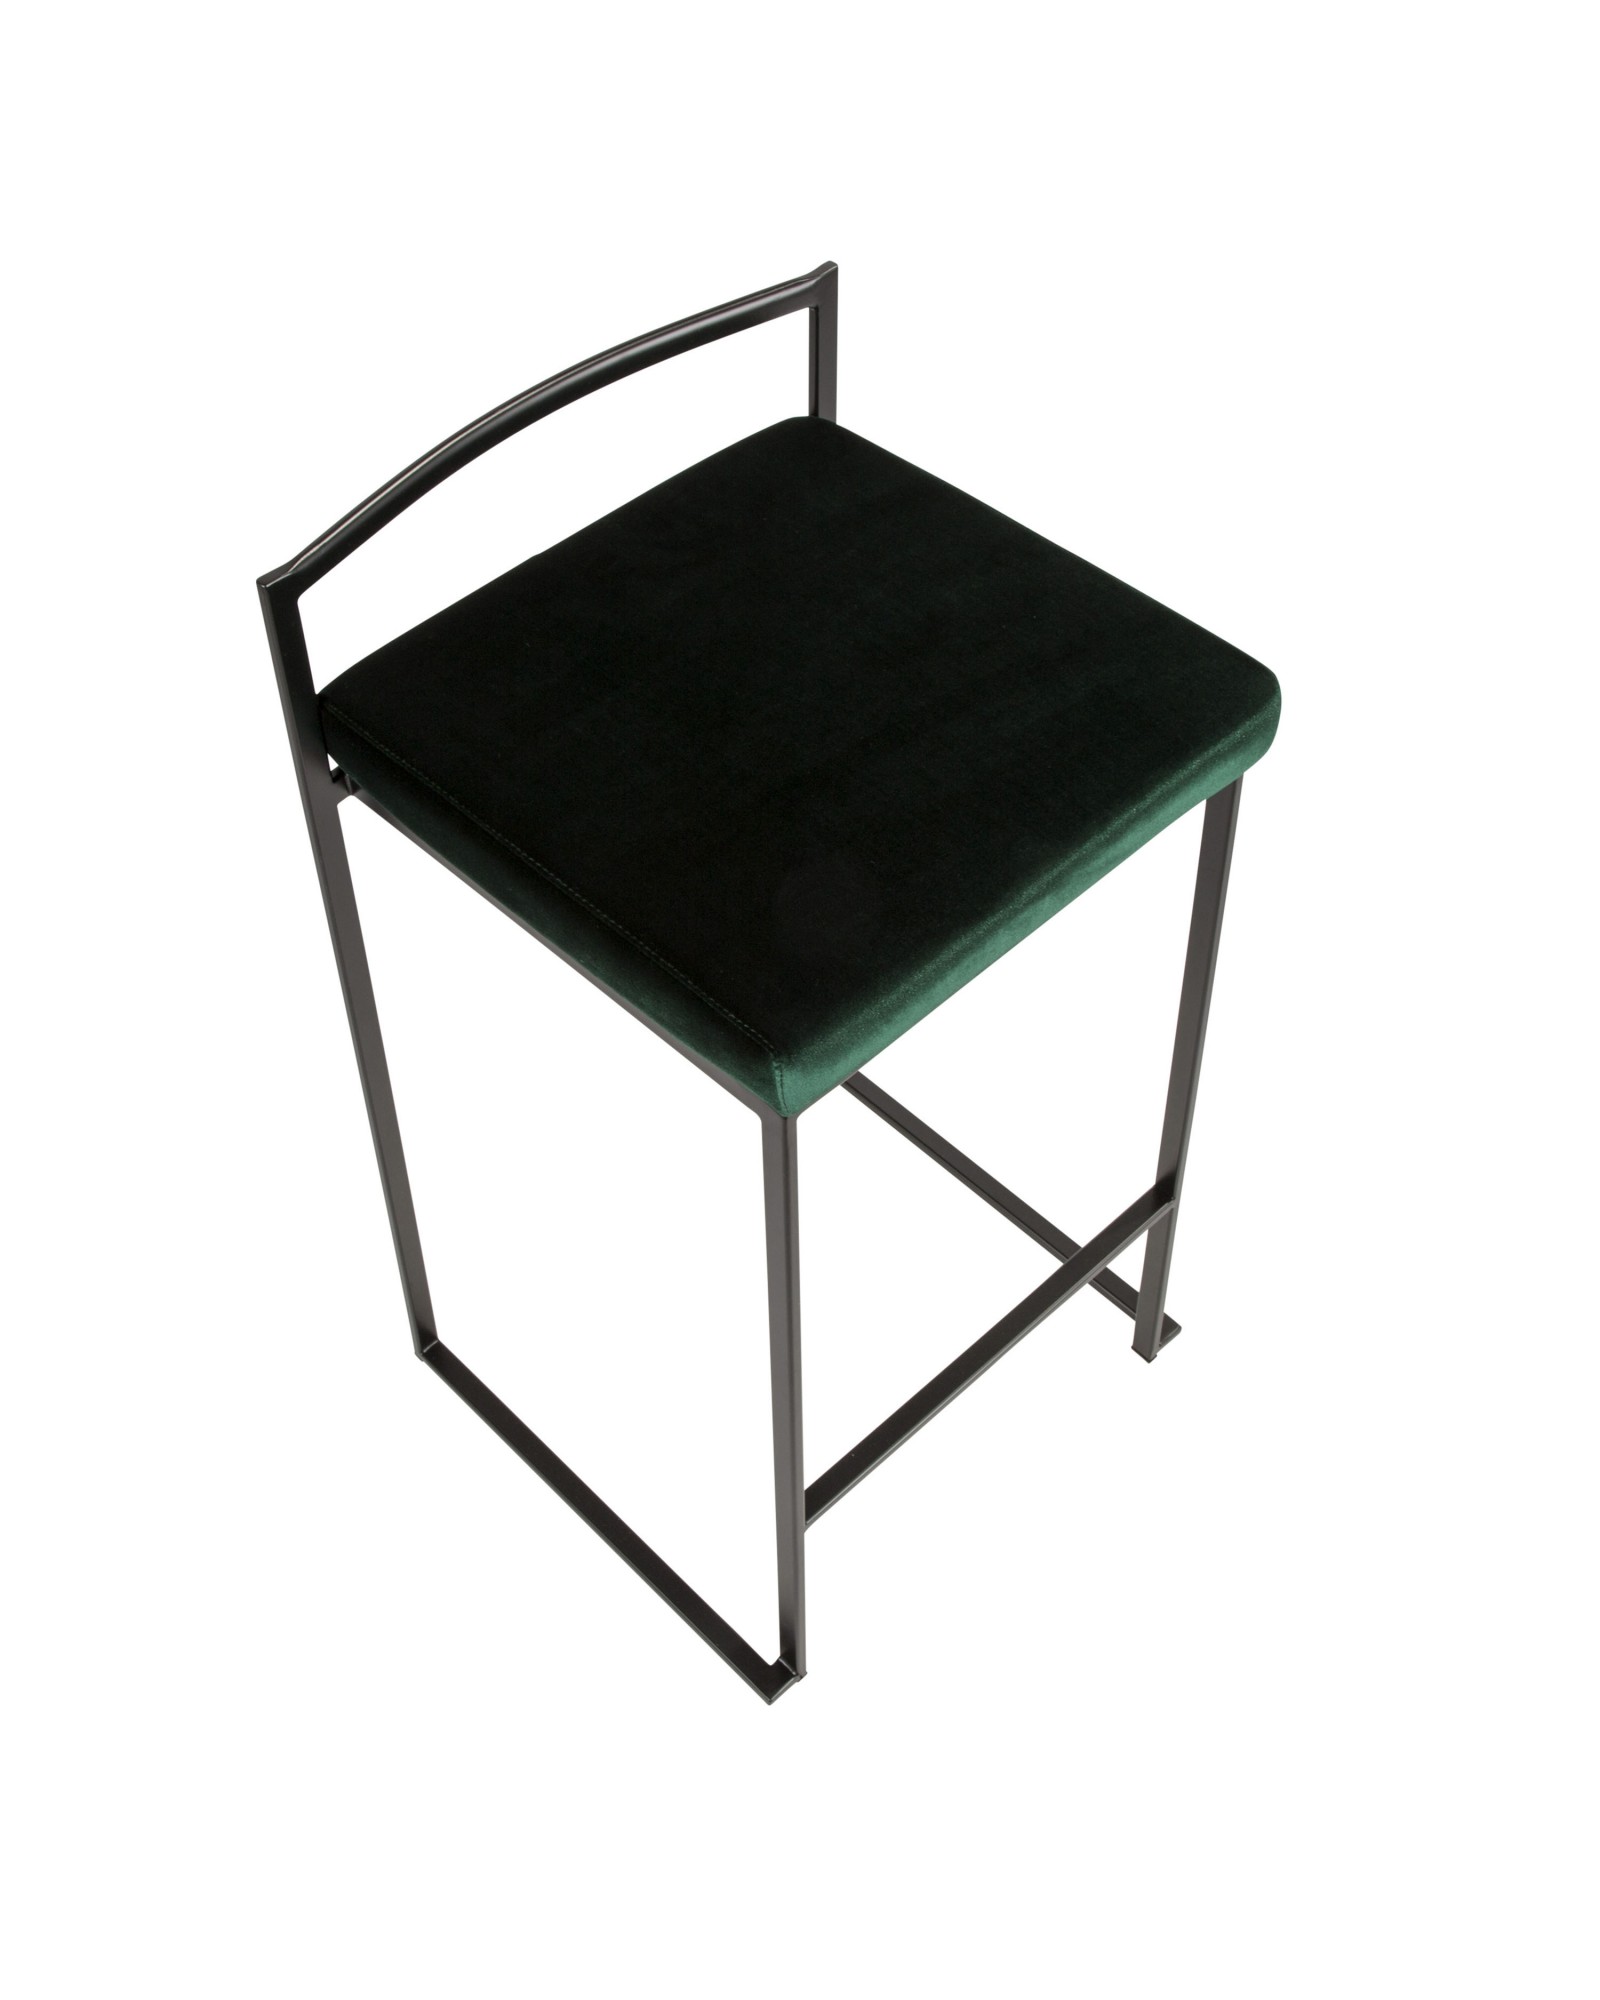 Fuji Contemporary Stackable Counter Stool in Black with Green Velvet Cushion - Set of 2